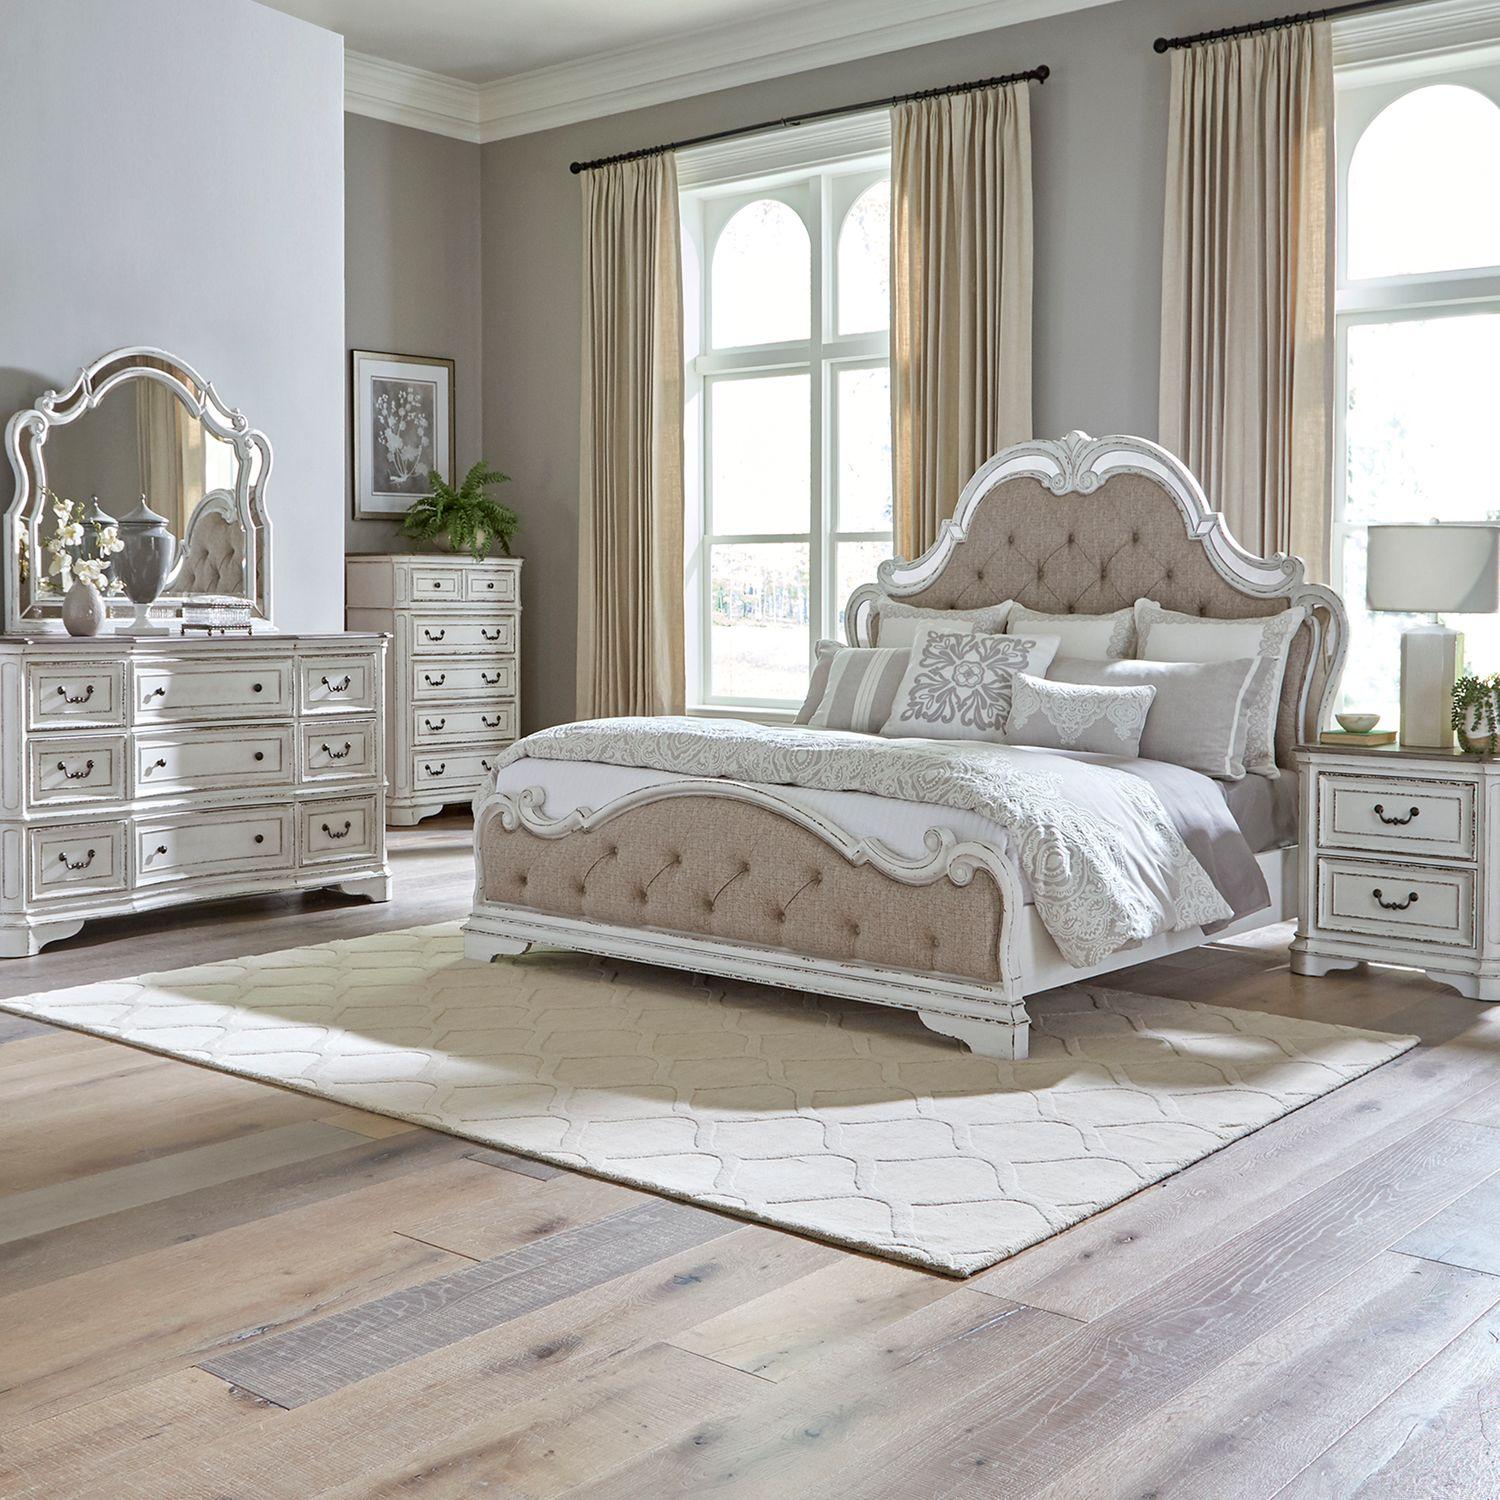 https://nyfurnitureoutlets.com/products/antique-white-king-mirrored-bed-set-5pc-magnolia-manor-244-br-liberty-furniture/1x1/575188-1-383356709401.jpg